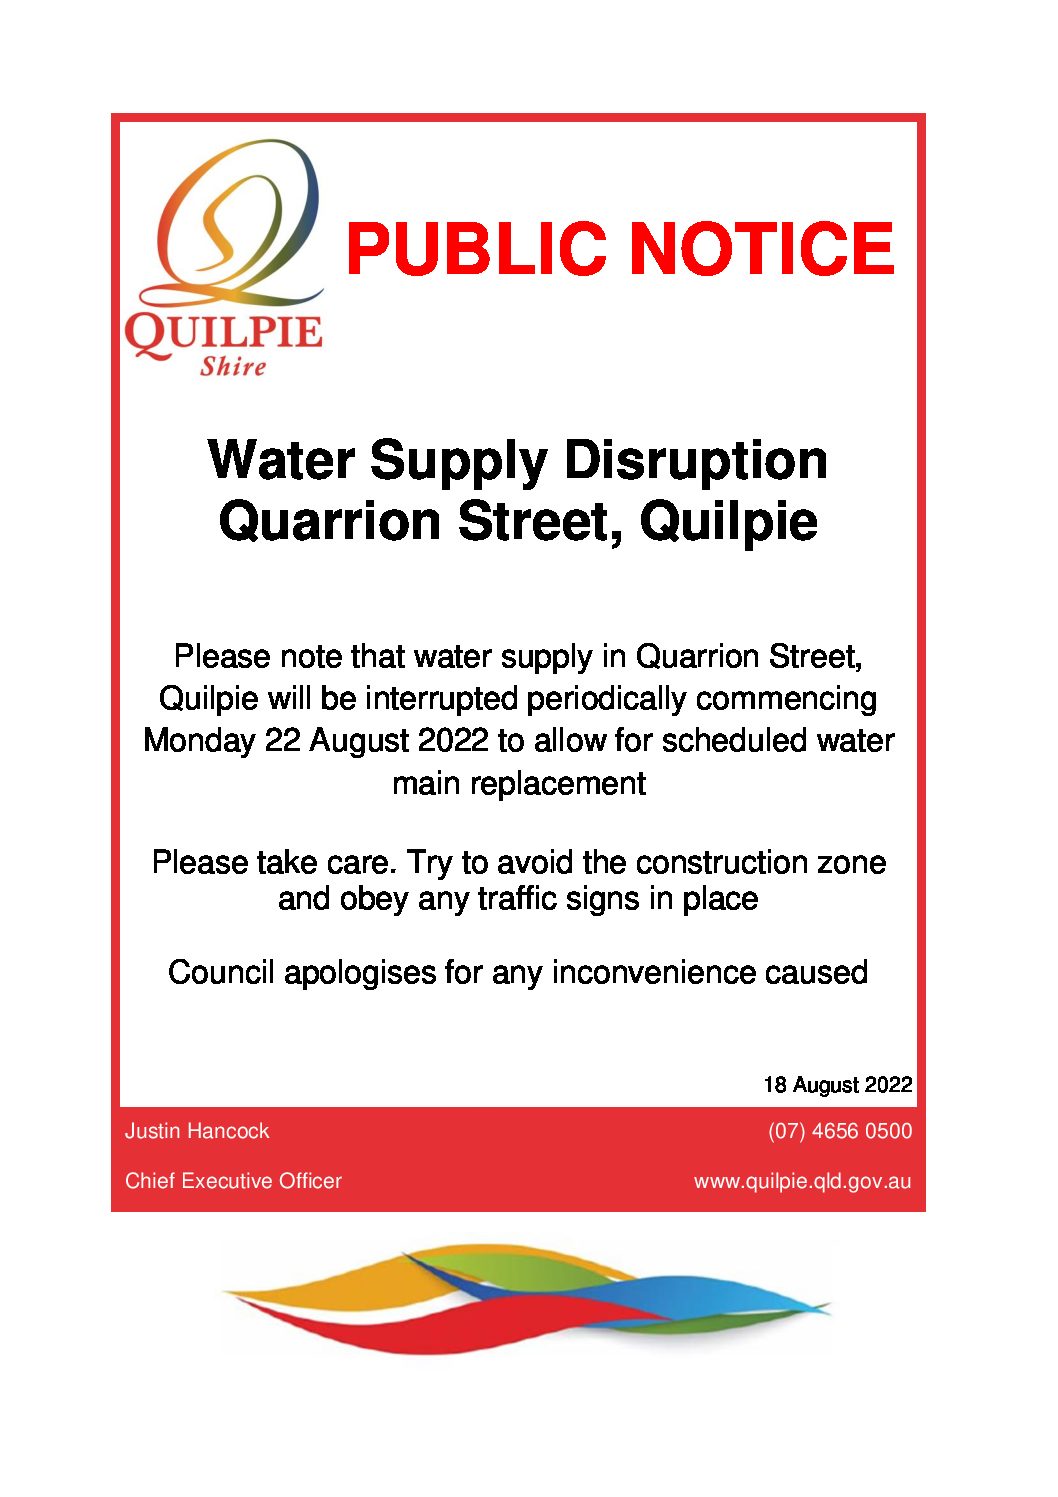 Quarrion Street Water Supply Disruption